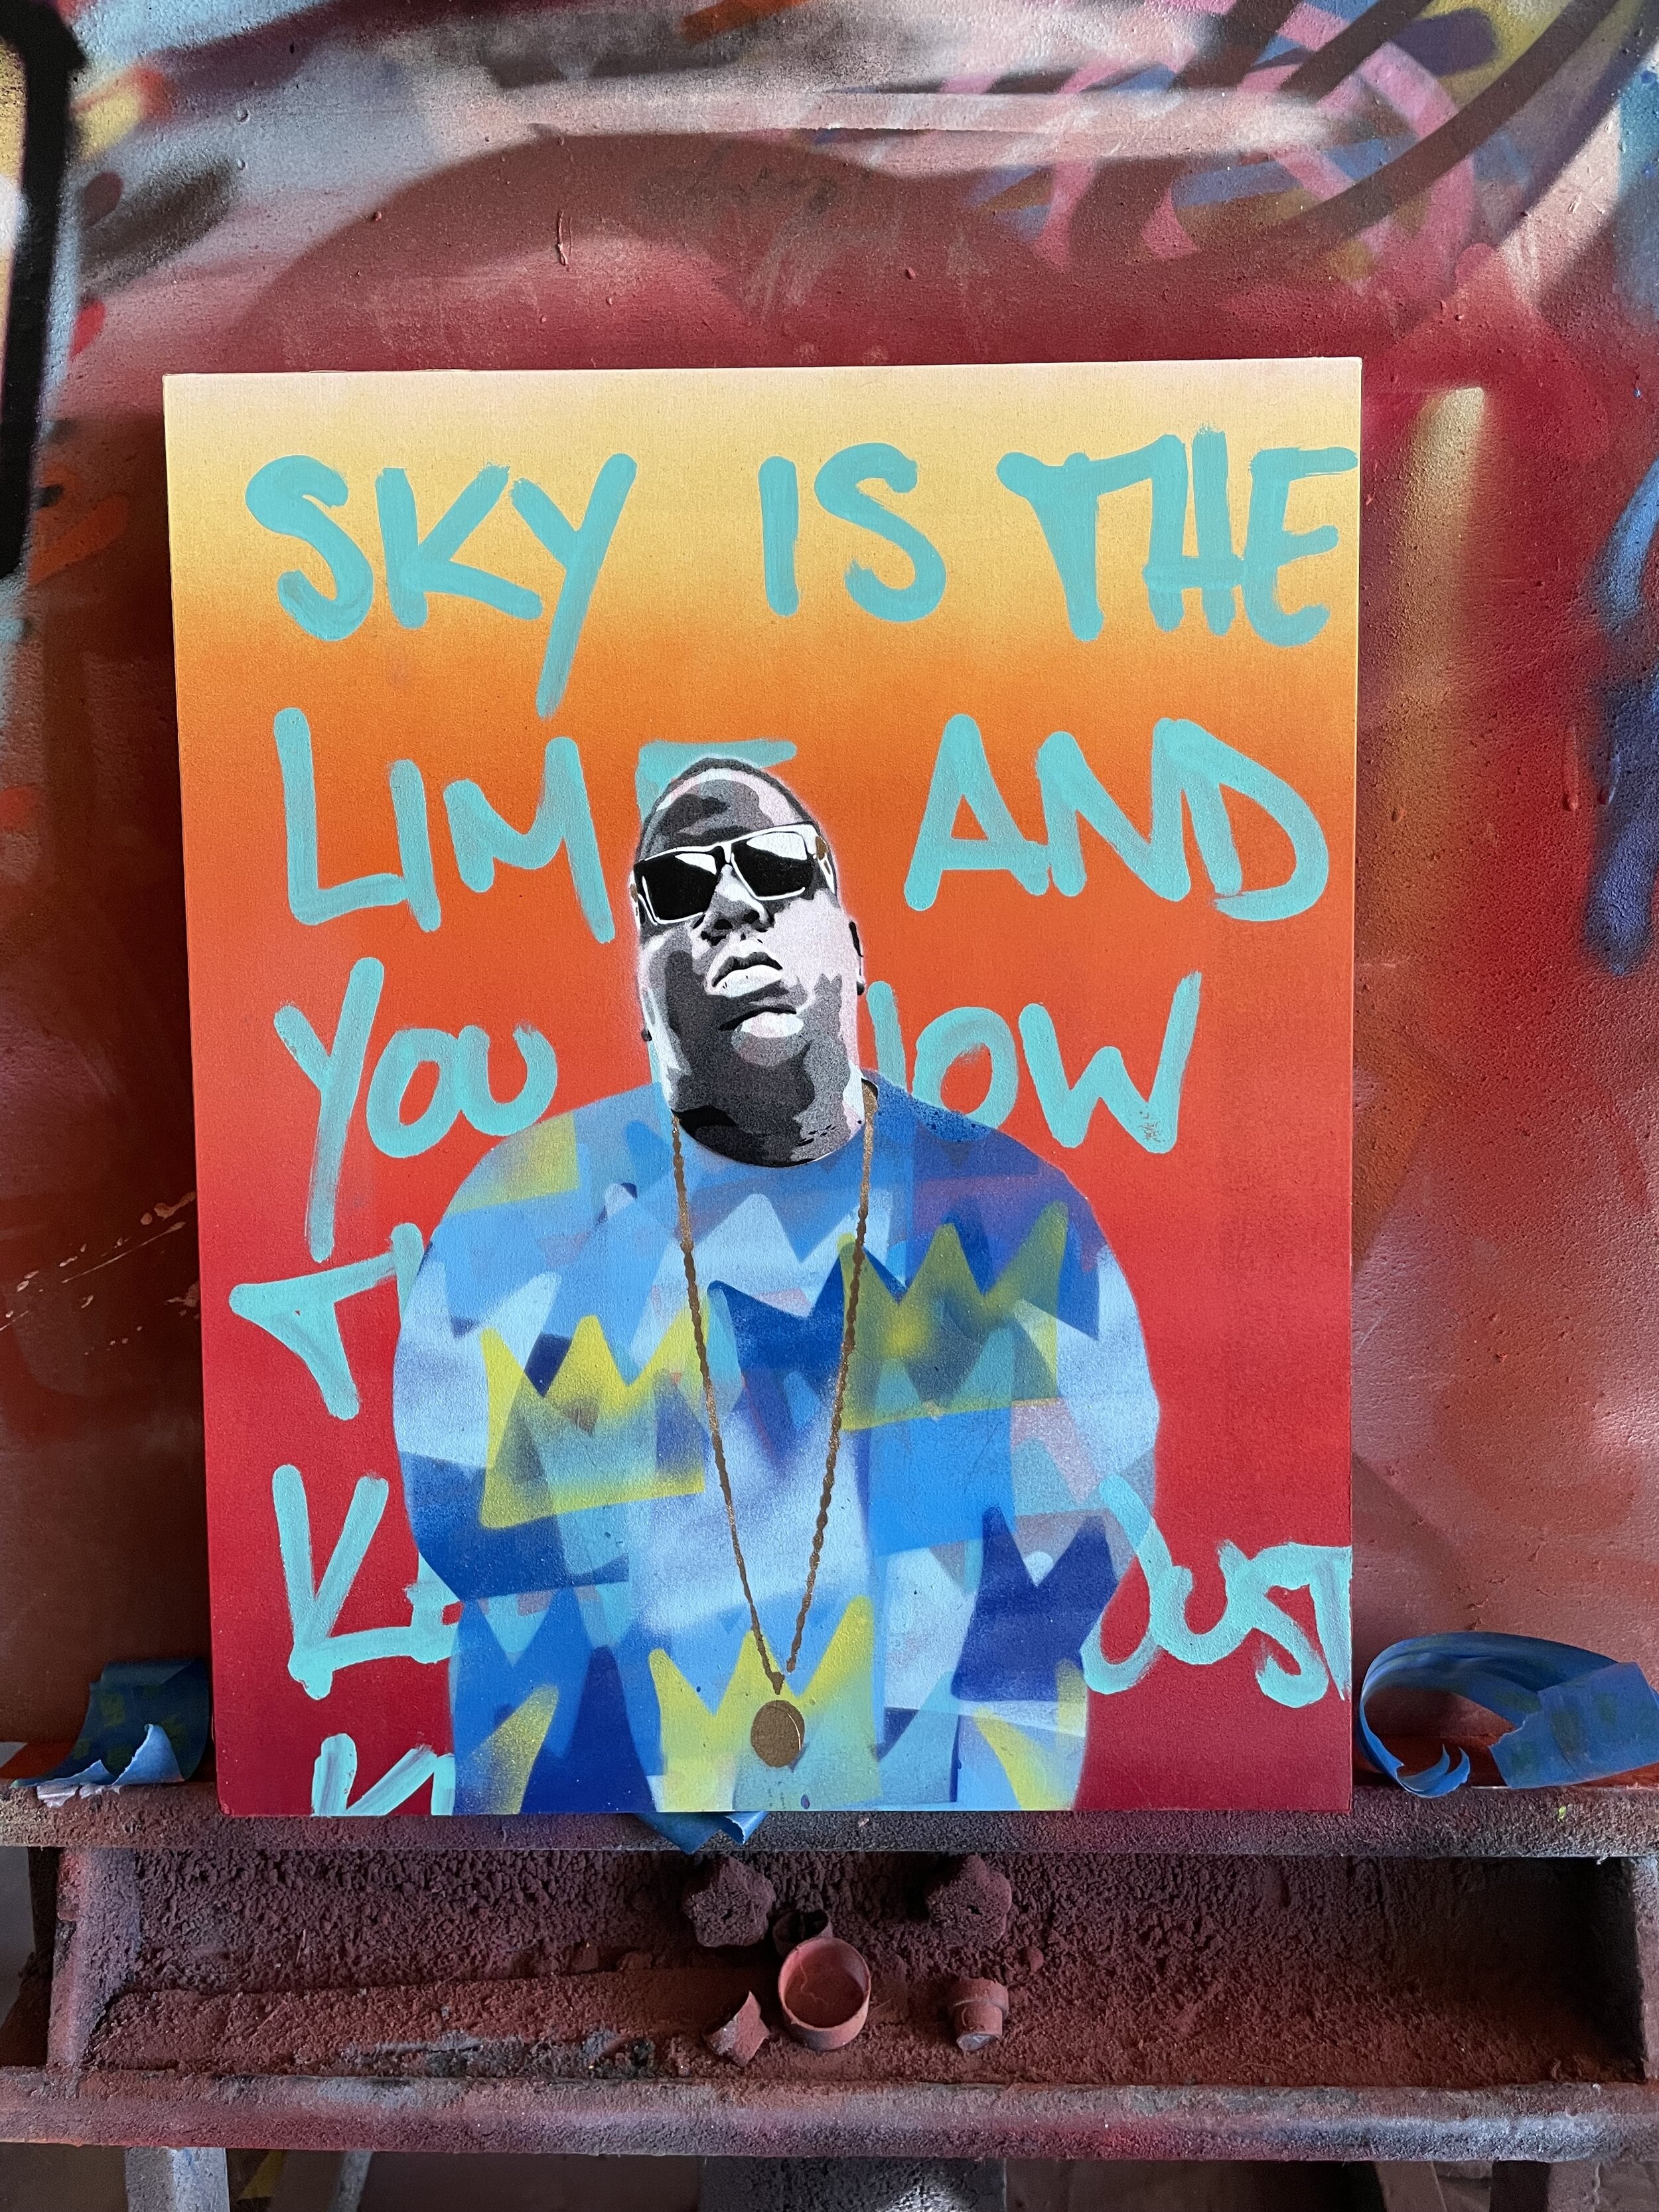 "Sky is the Limit"